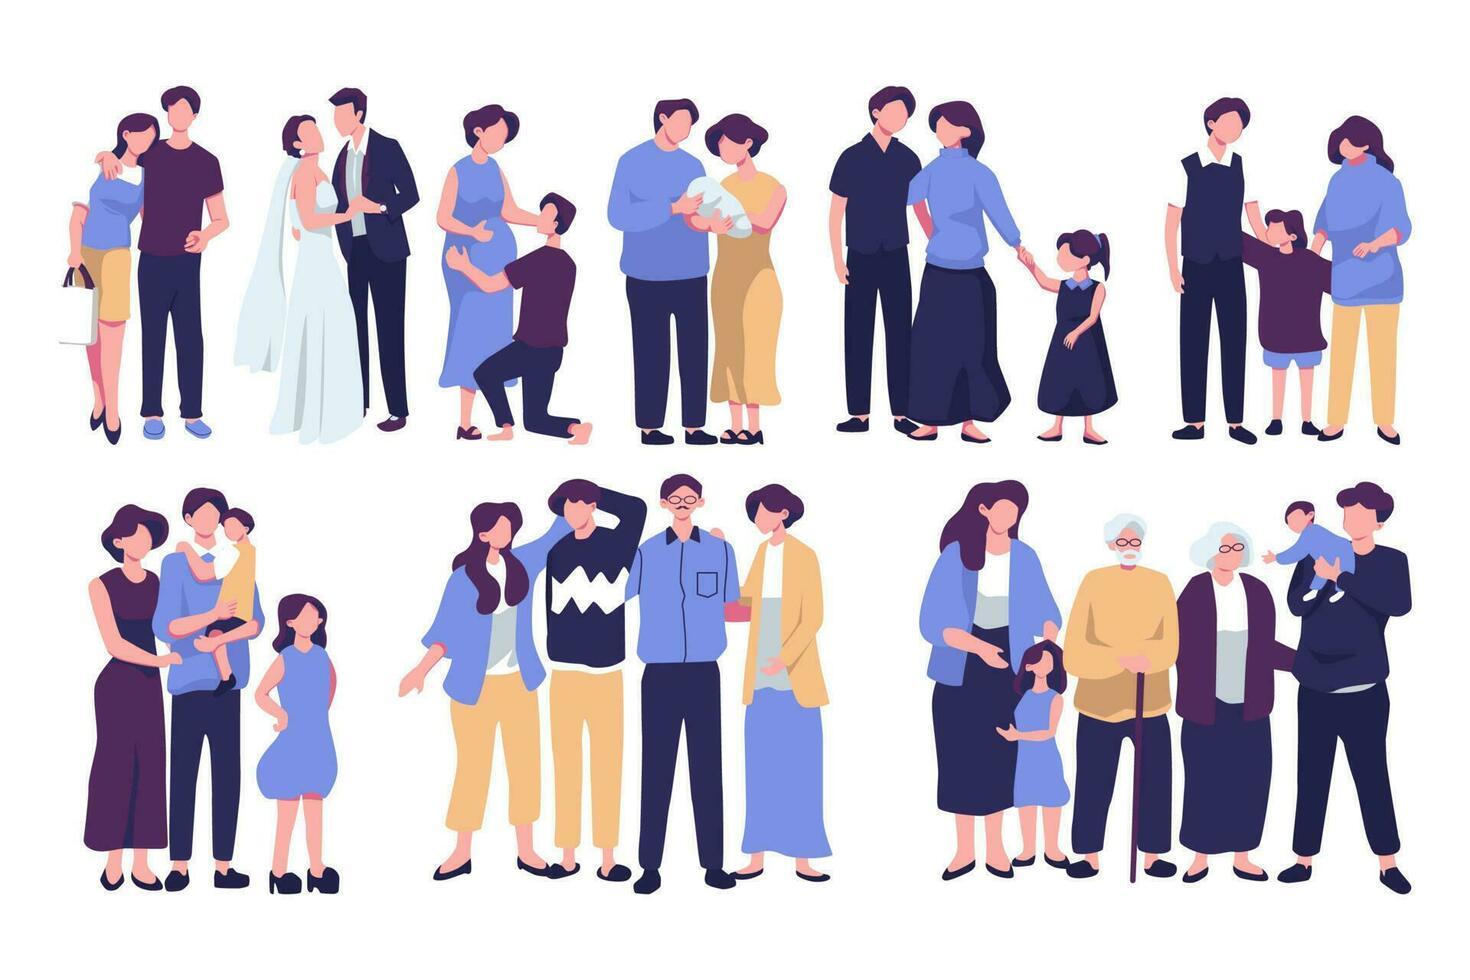 Growing family life stages concept flat style illustration vector